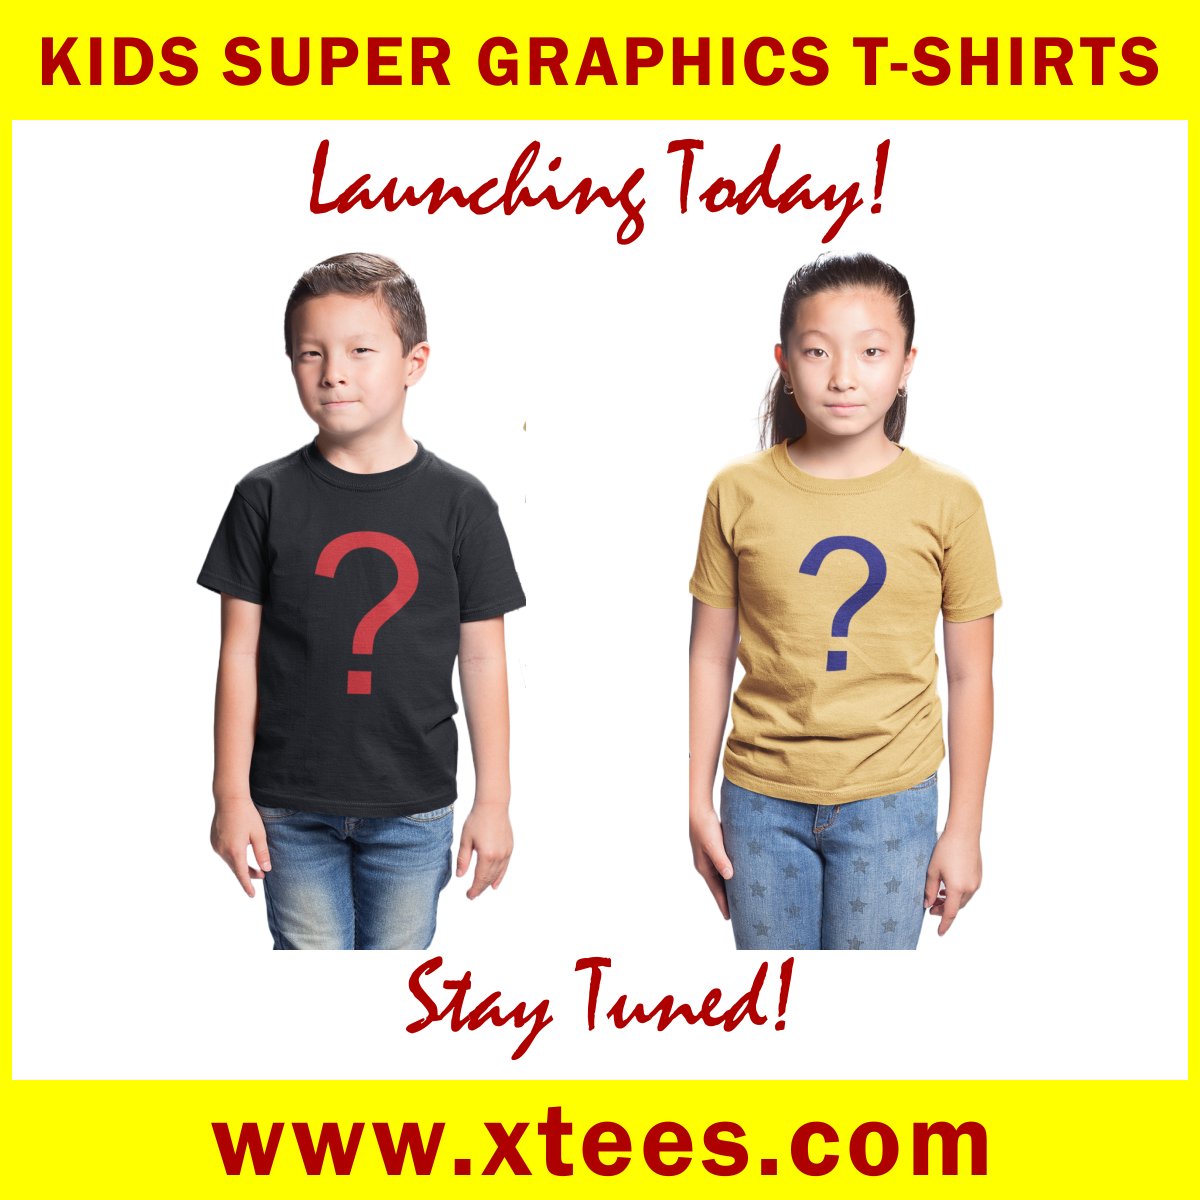 #kidsofinstagram #kids #boys #girls #babiesofinstagram #babies #tshirts #tshirt #graphictshirts #graphictshirt #printedtshirts #printedtshirt #digitalprint #digitalprinting | Launching Today | Stay Tuned | xtees.com